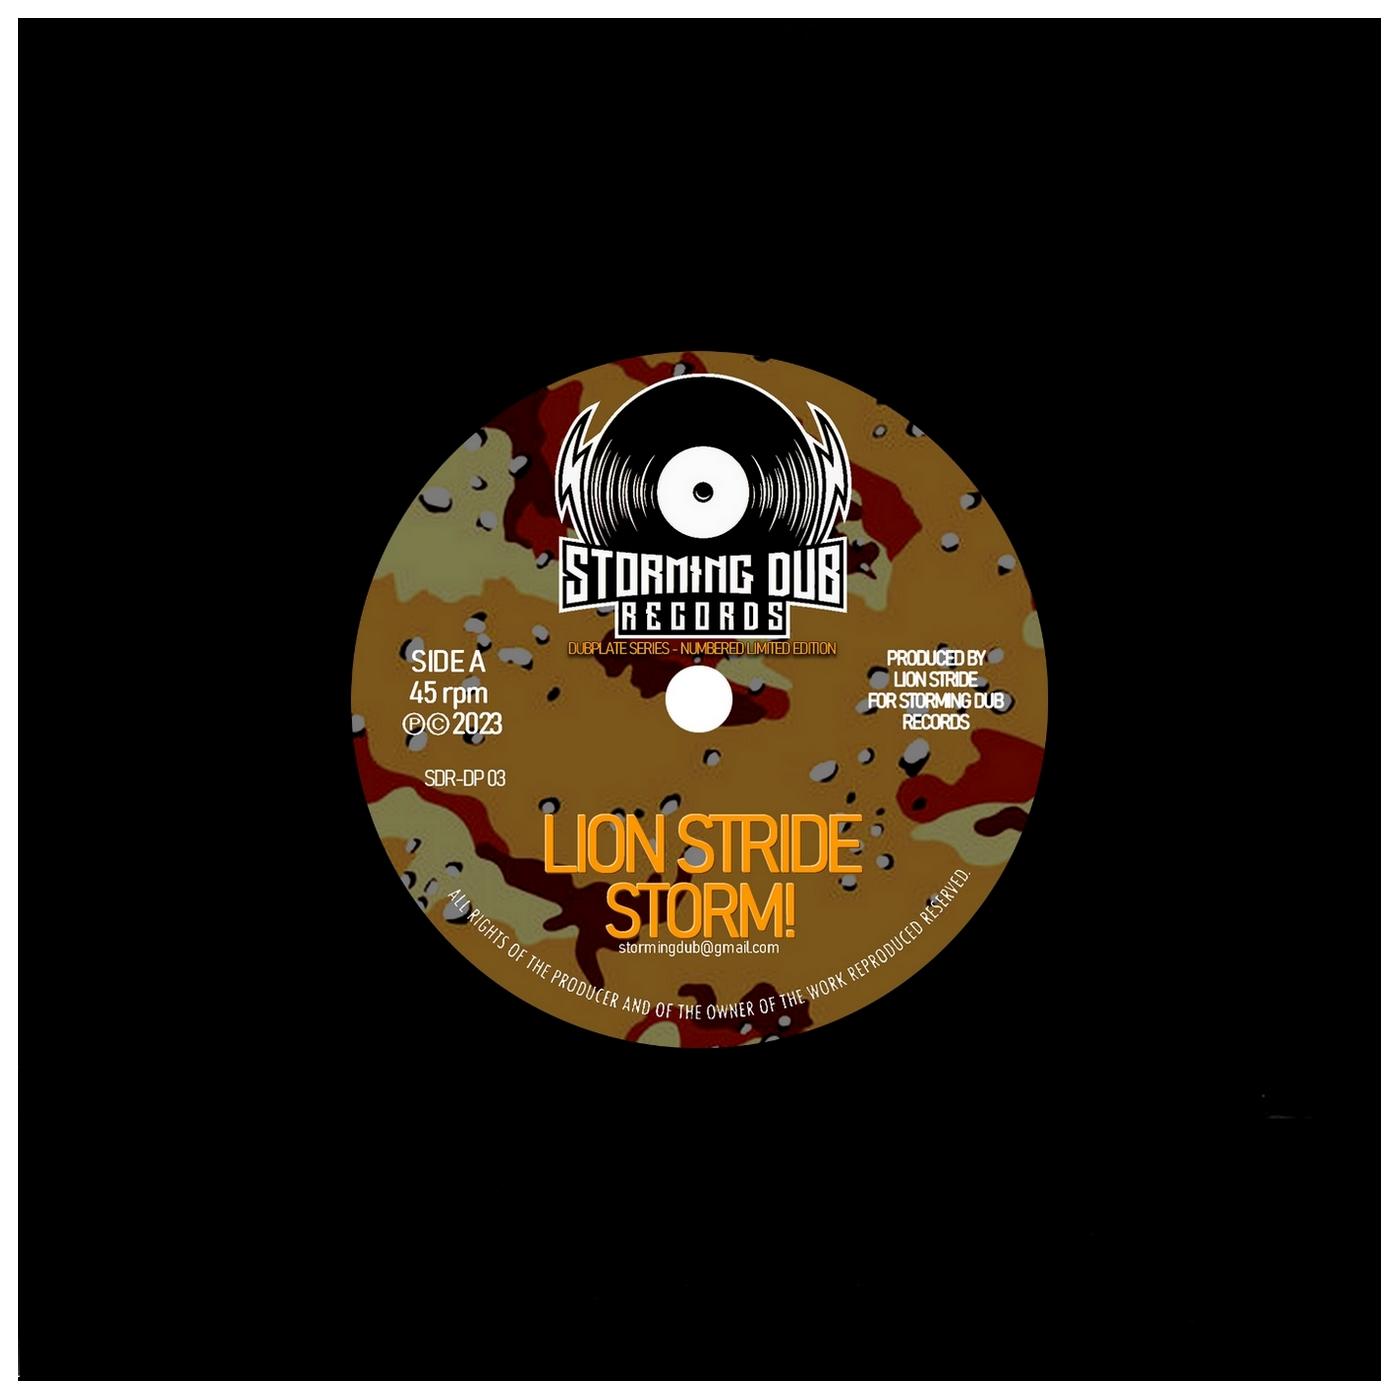 Lion Stride STORMING DUB RECORDS 7 inch (LATHE CUT LIMITED EDITION)